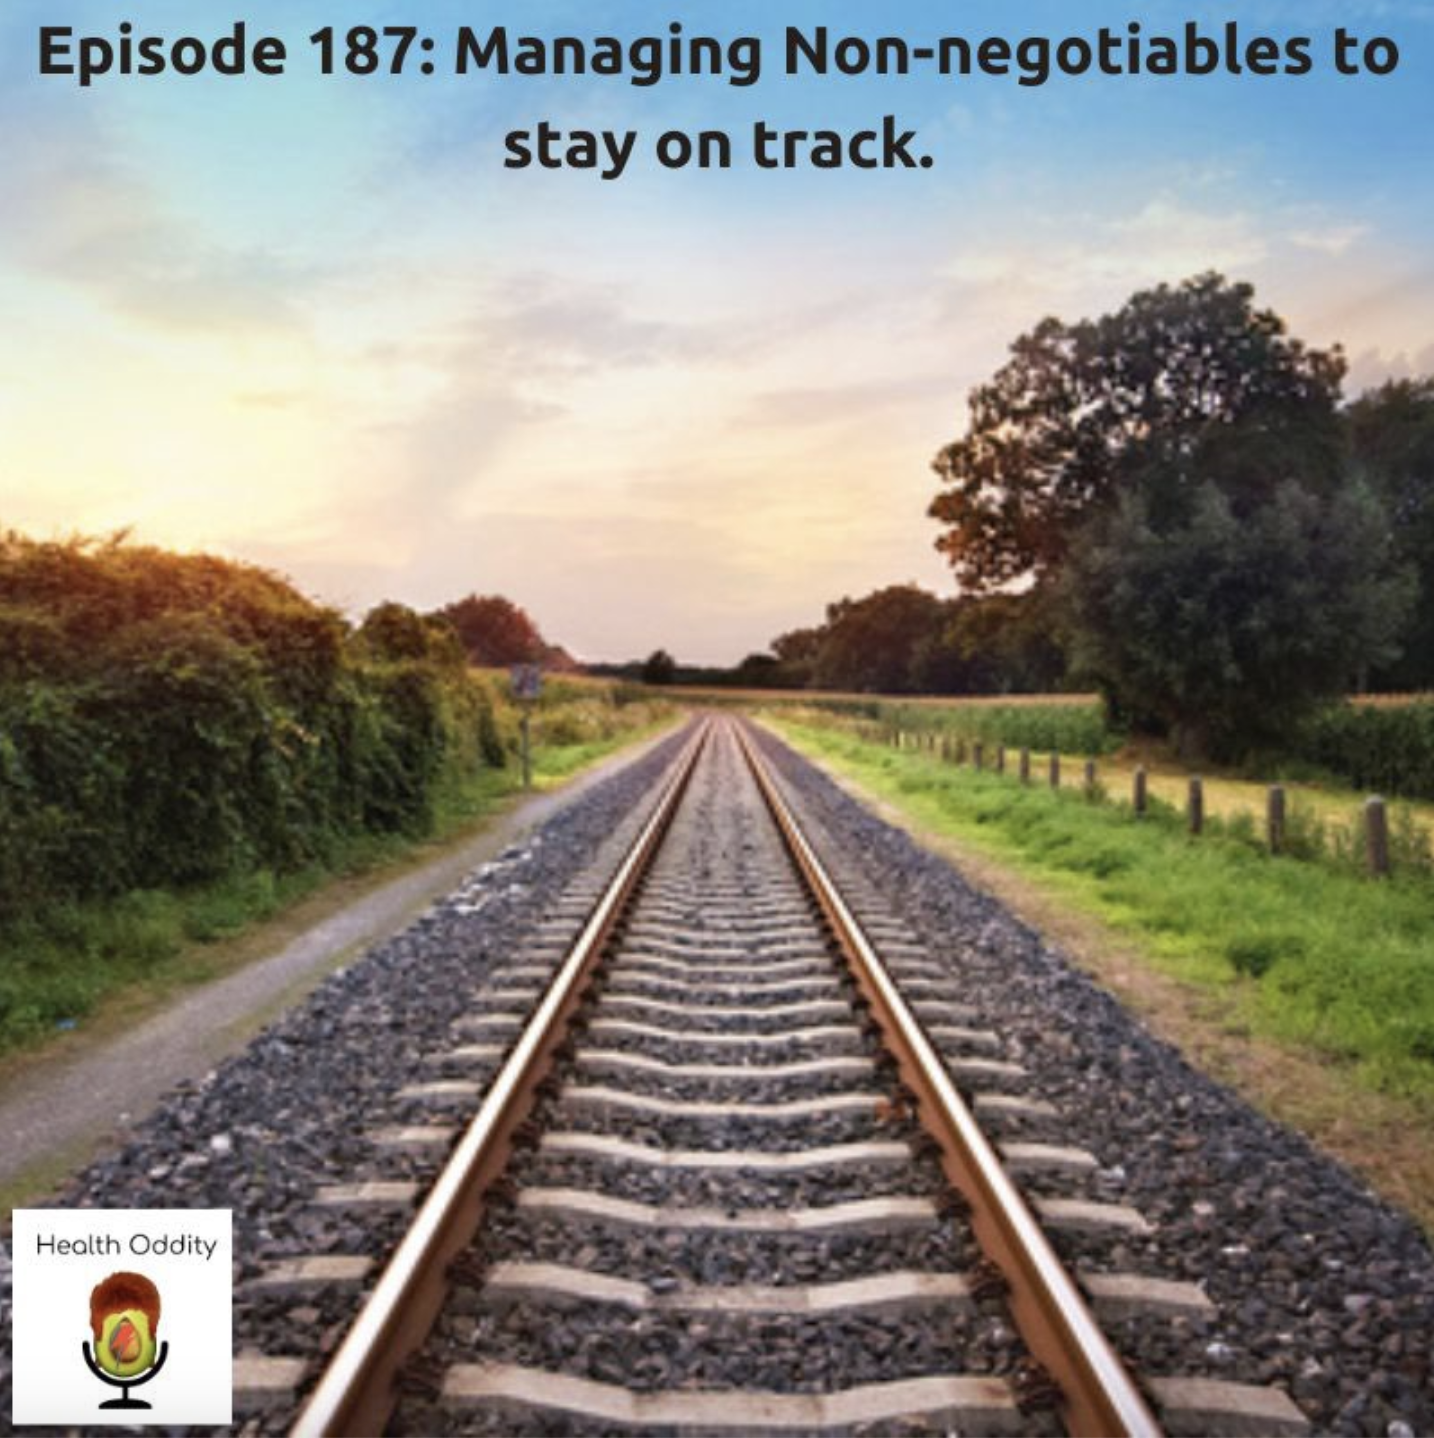 #187 Managing Non-negotiables to stay on track